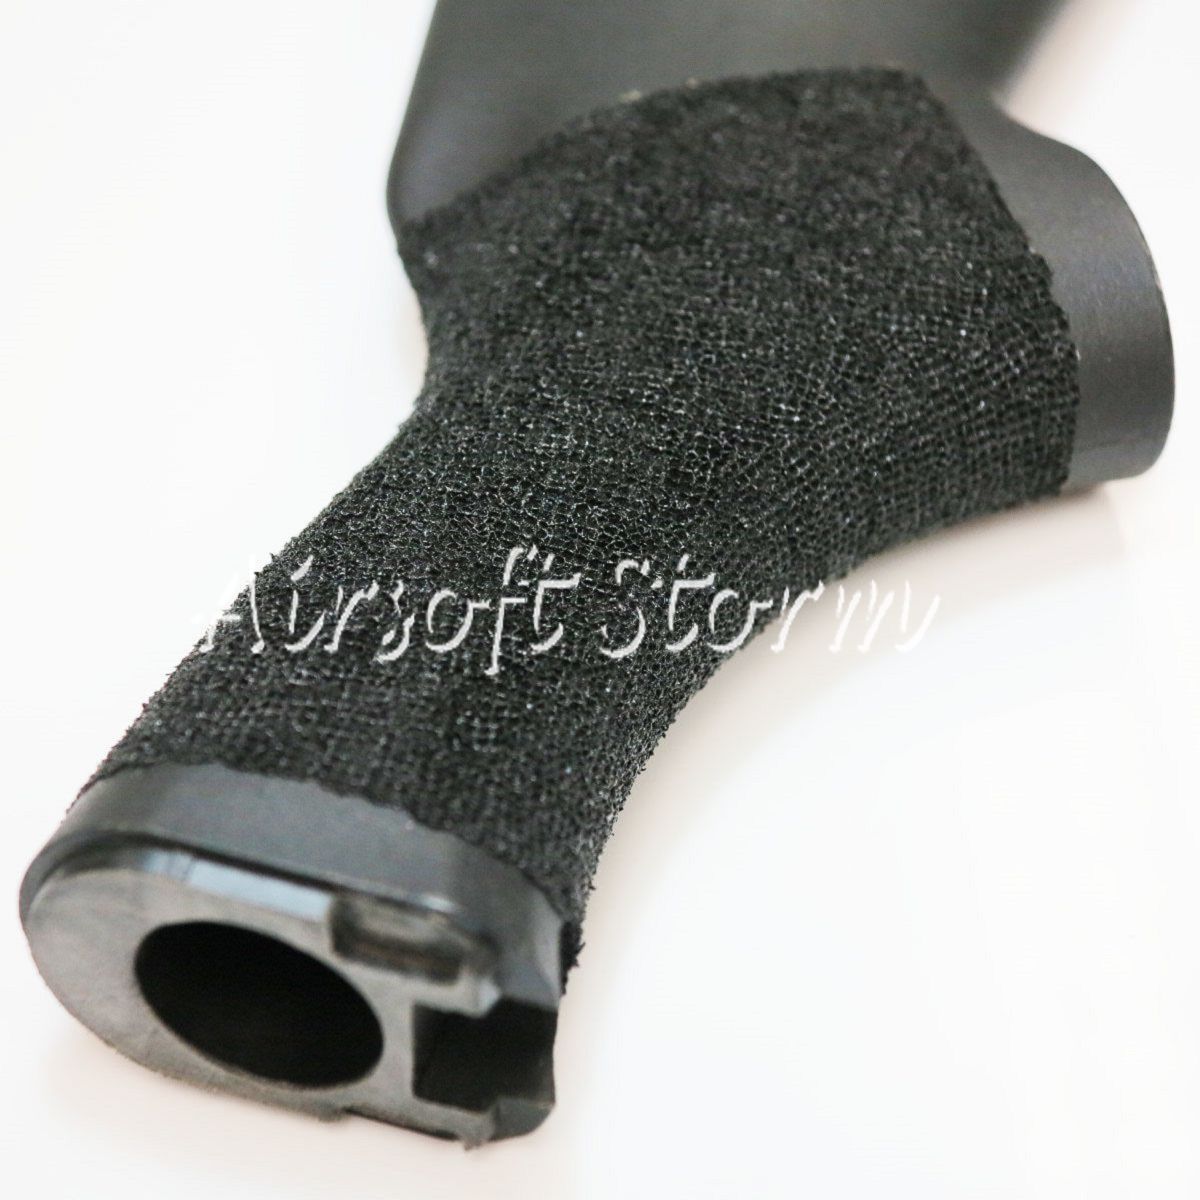 Airsoft AEG Tactical Shooting Gear APS 870 Police Style Butt Stock With Stipple For APS CAM870